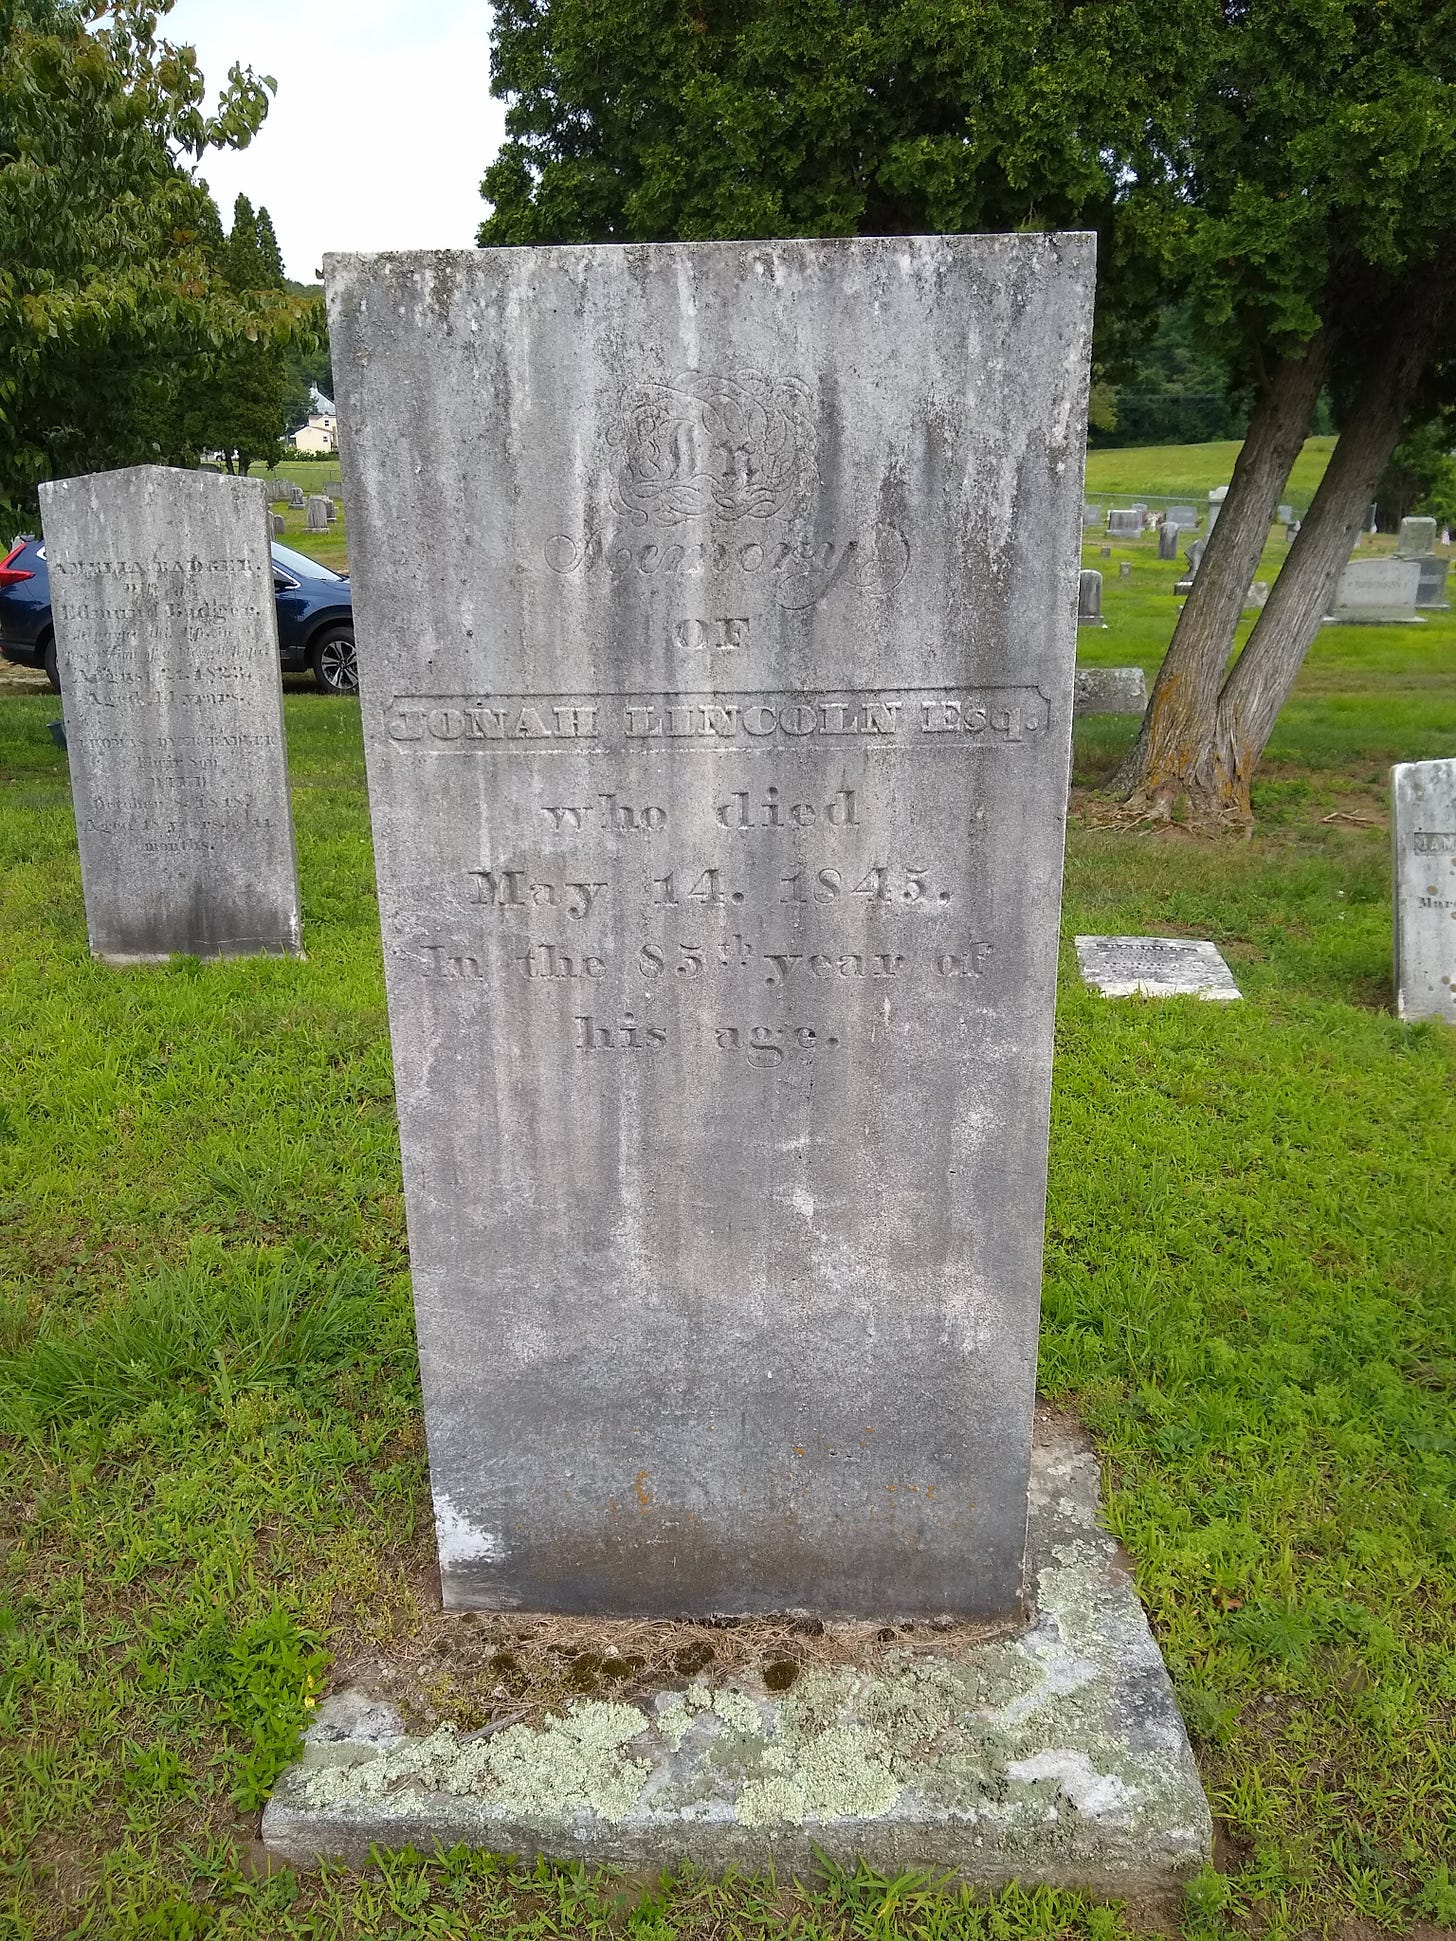 Grave of Jonah Lincoln died 1845